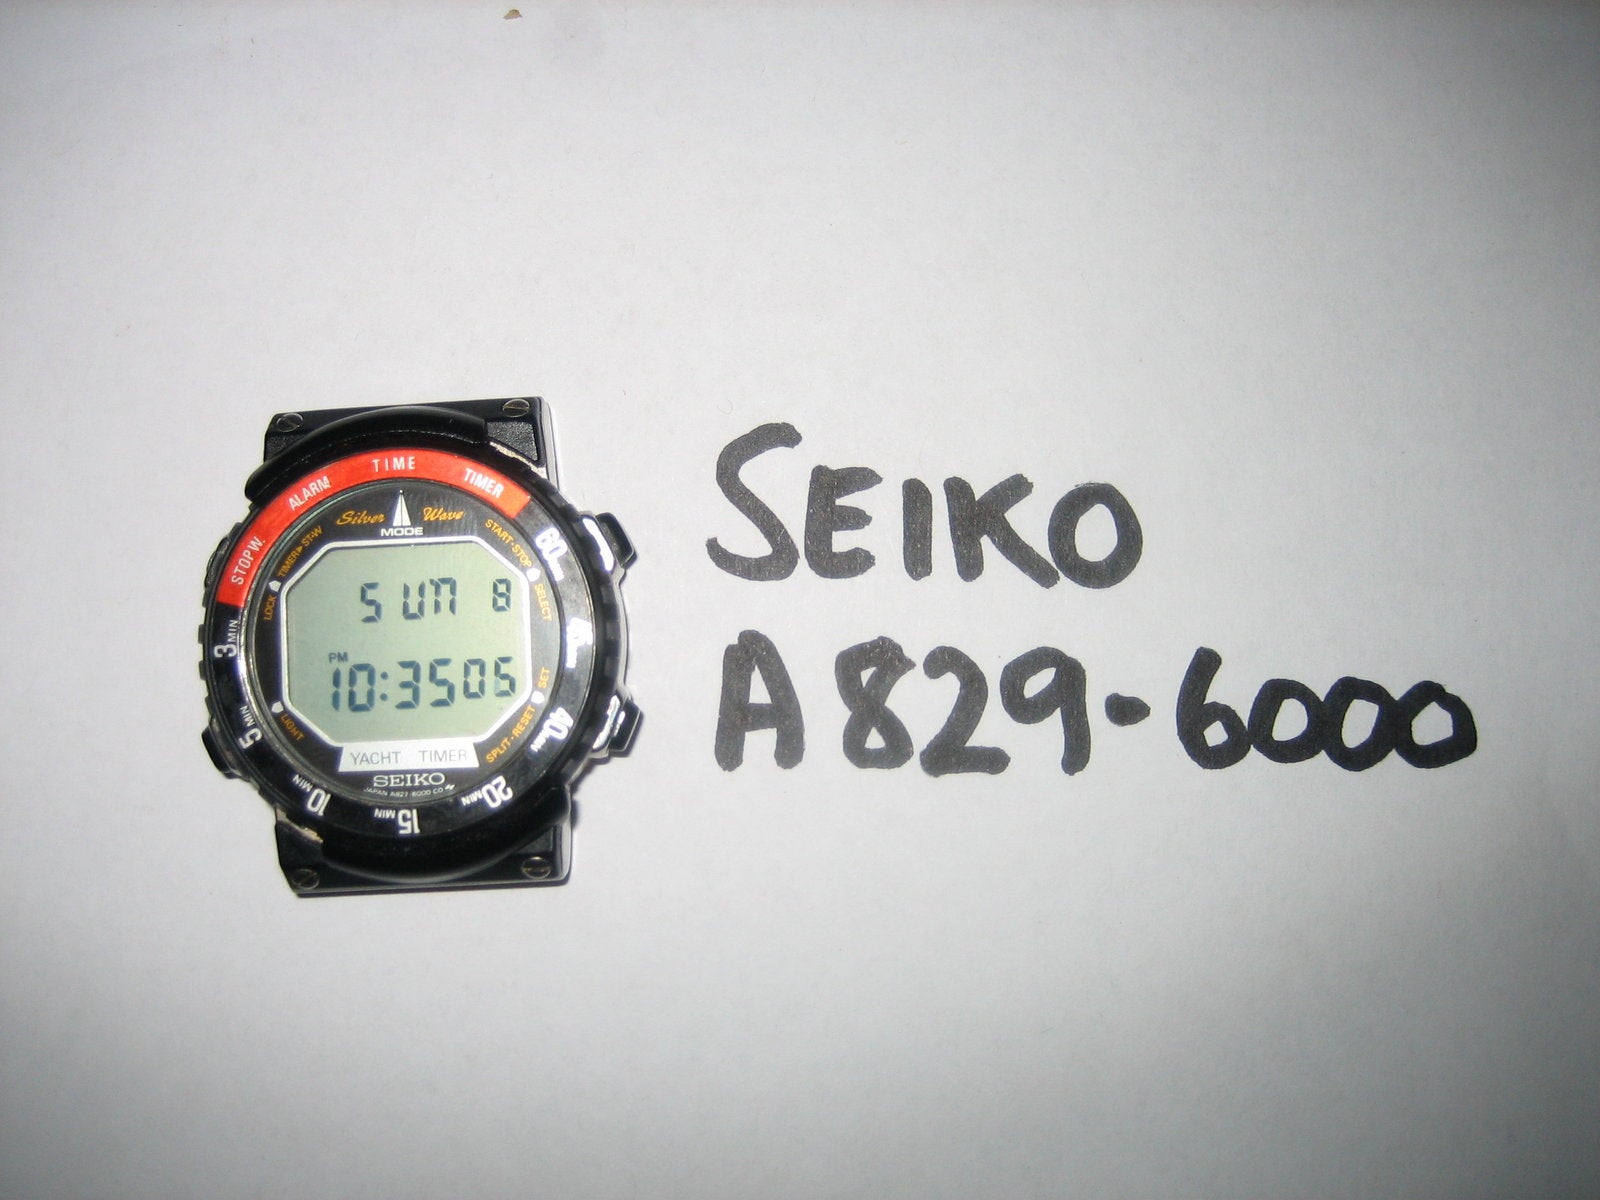 Seiko a829 band? | The Watch Site